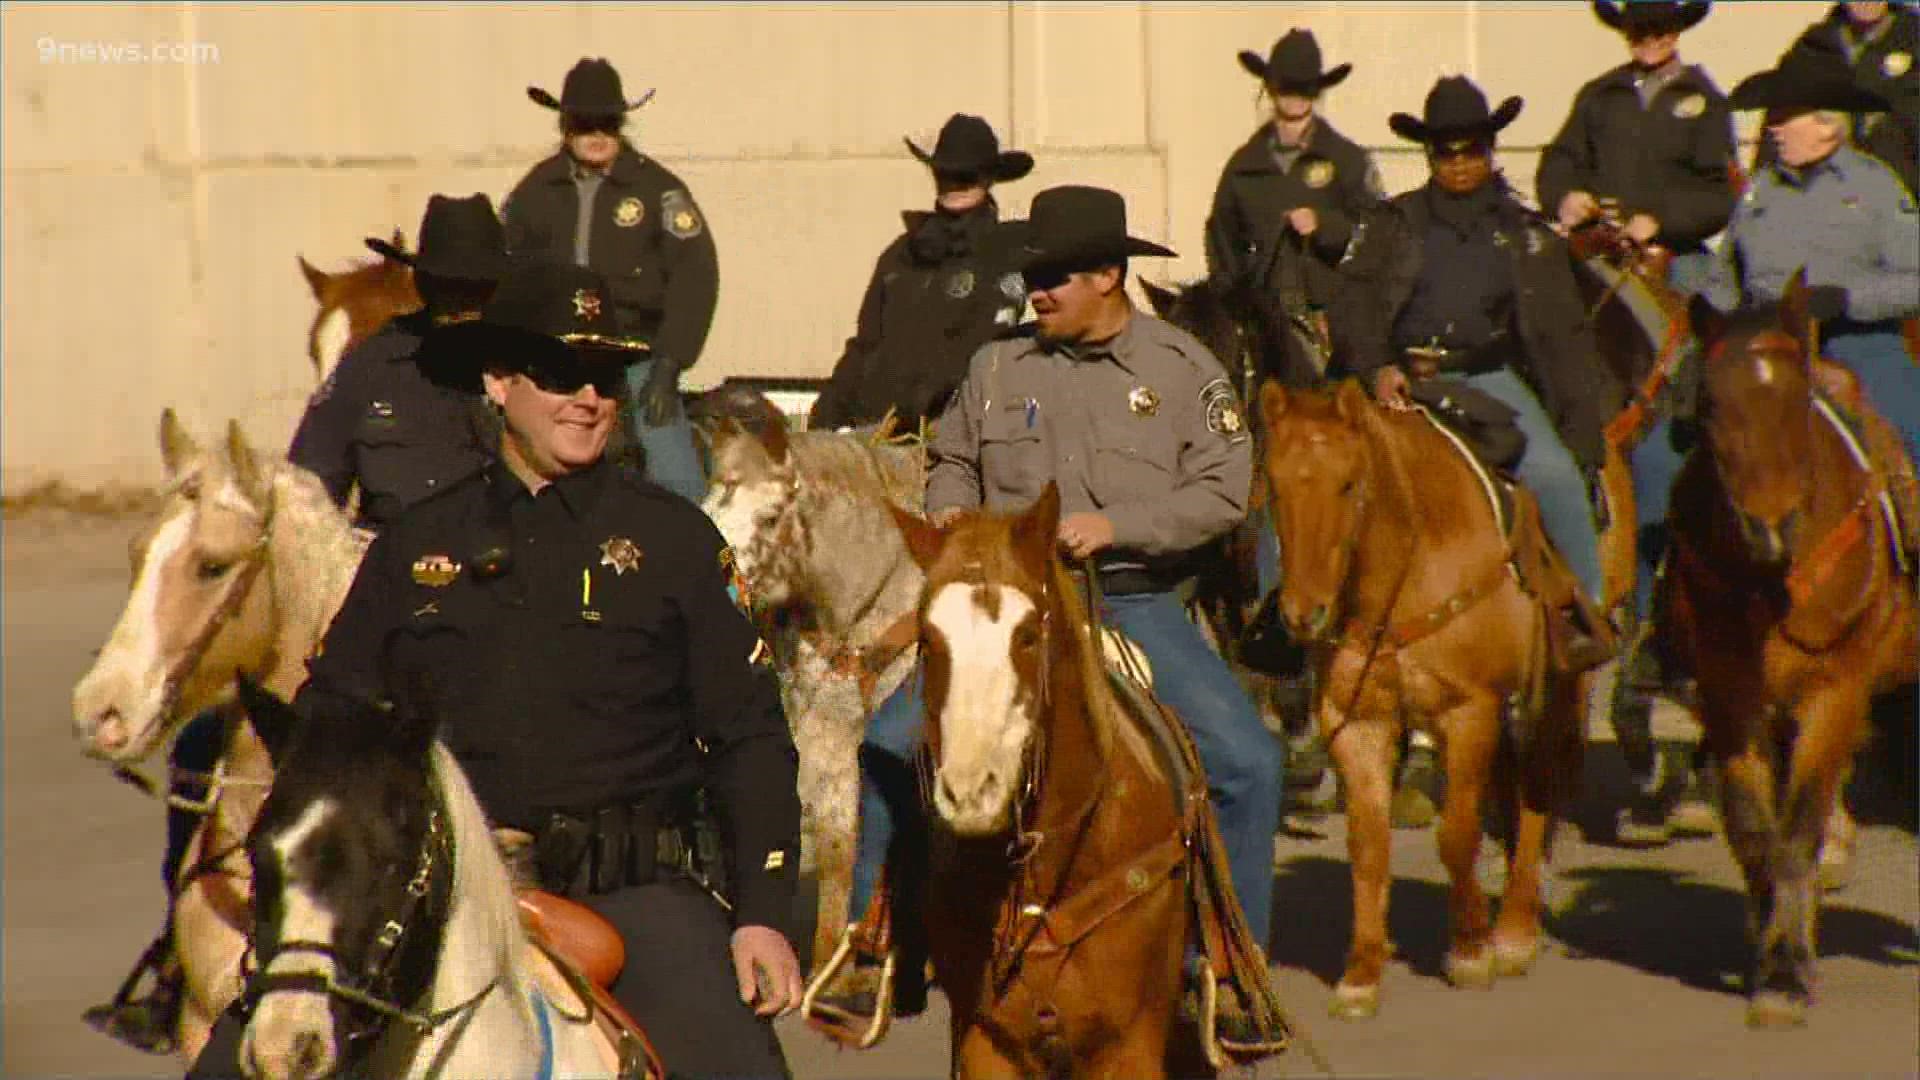 The National Western Stock Show and Rodeo parade was to take place Thursday in downtown Denver.